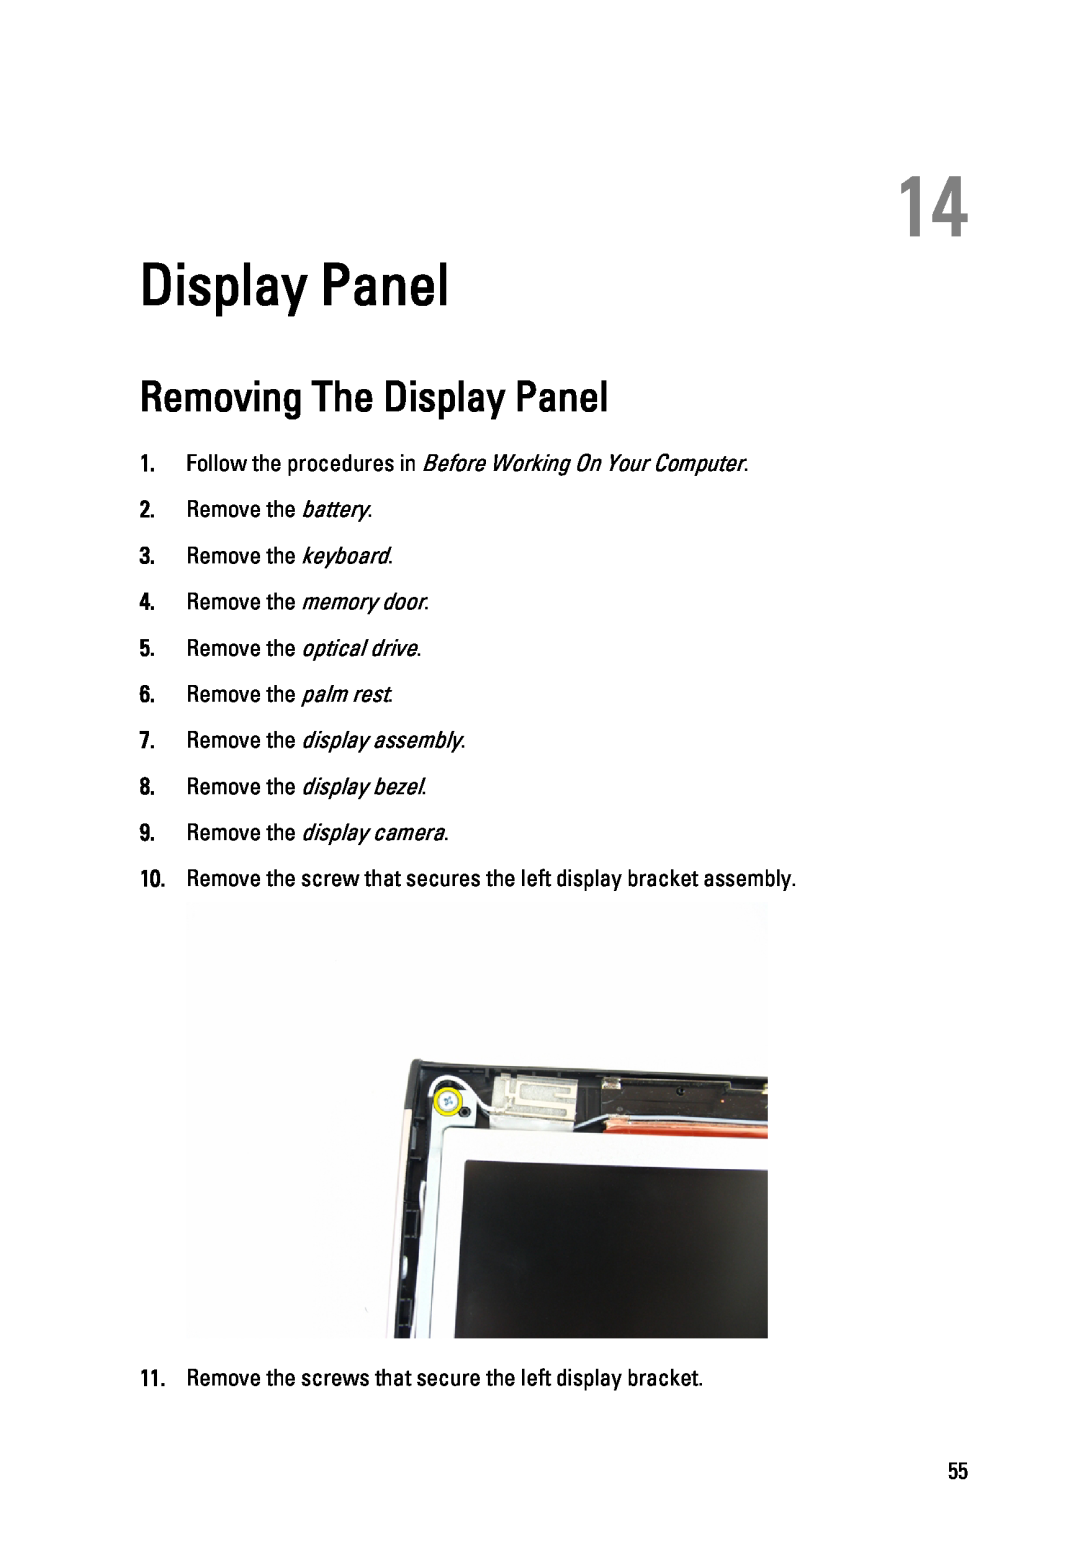 Dell 3450 owner manual Removing The Display Panel, Remove the display camera, Remove the optical drive 